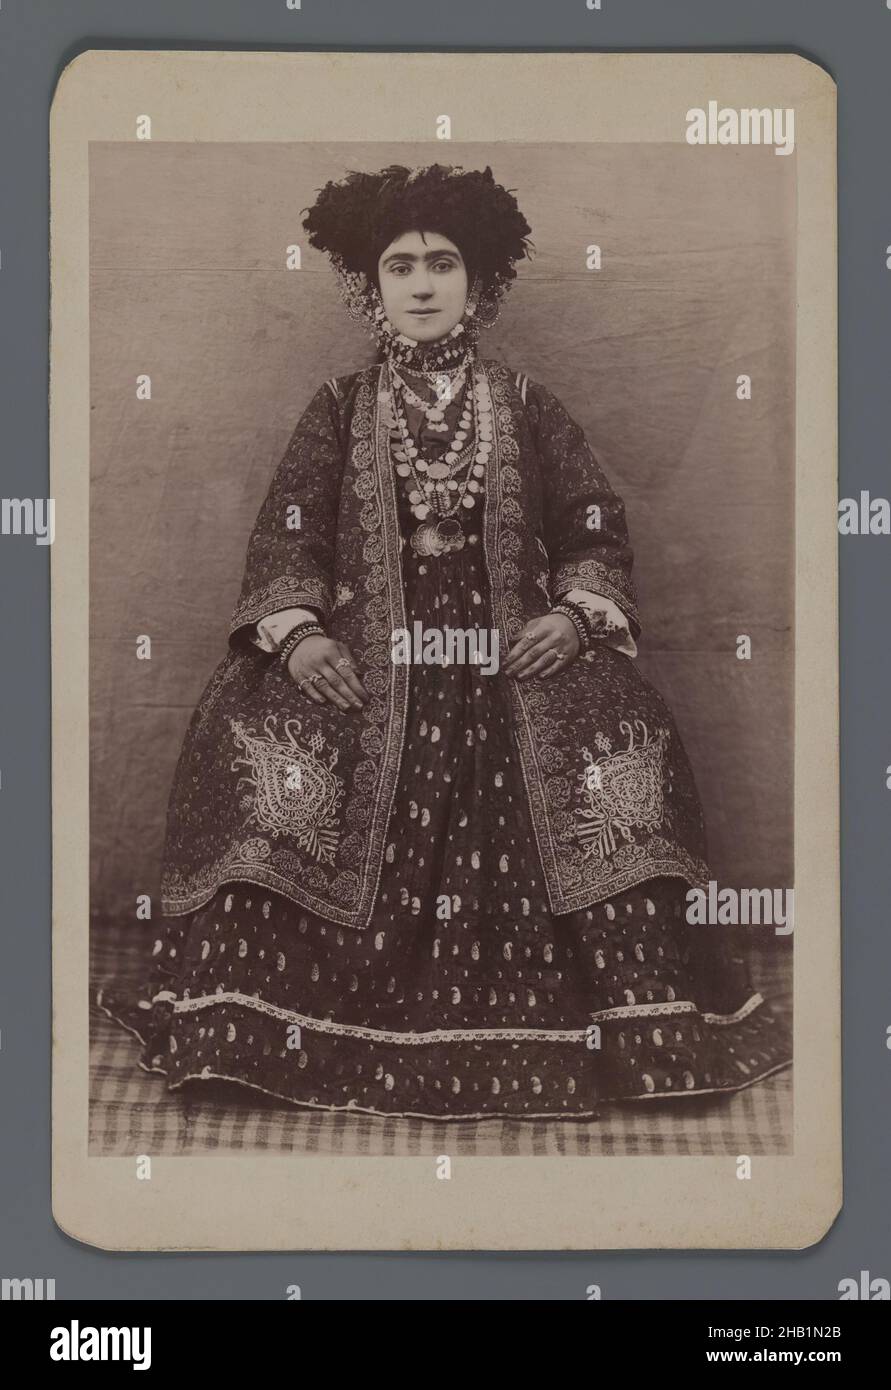 Female Member of a Tribal Khan's Family, One of 274 Vintage Photographs, Albumen silver photograph, late 19th-early 20th century, Qajar, Qajar Period, photo: 5 1/2 x 3 13/16 in., 14.0 x 9.7 cm Stock Photo